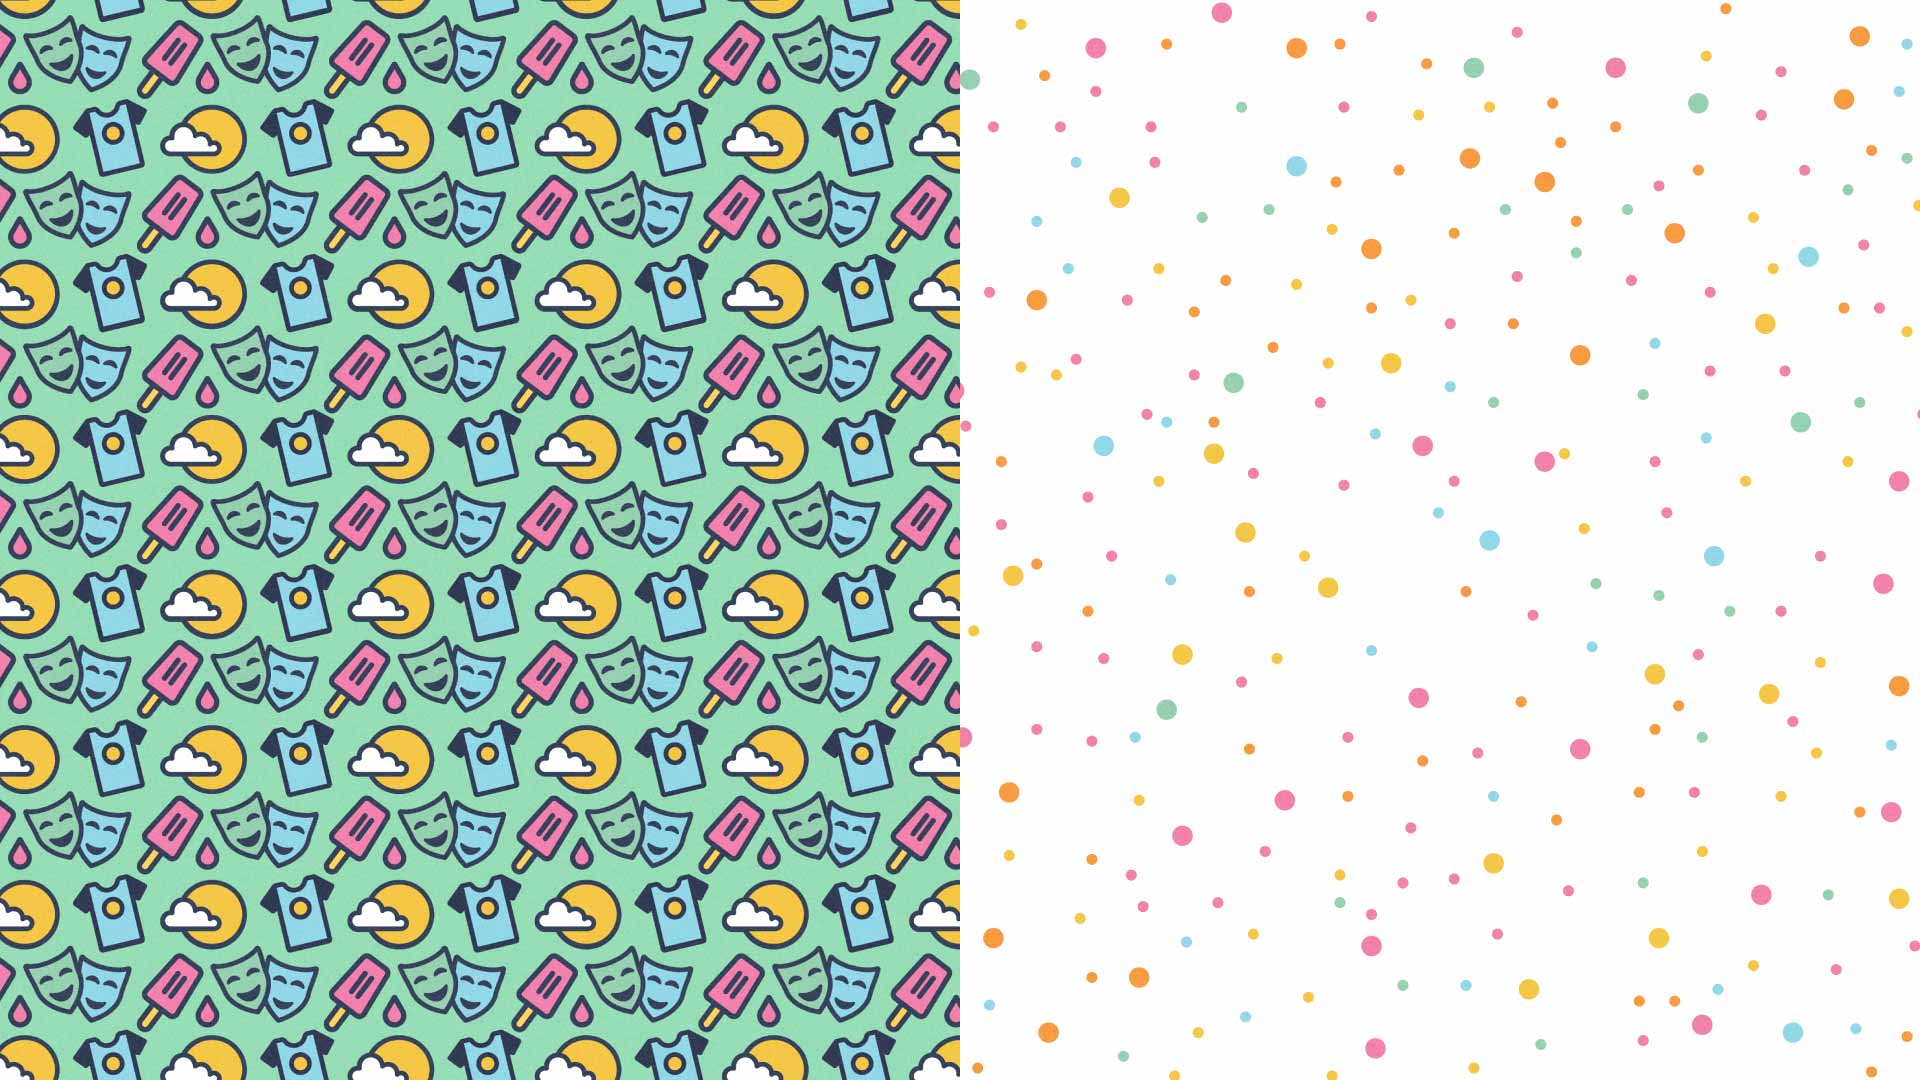 Pattern of various illustrative icons